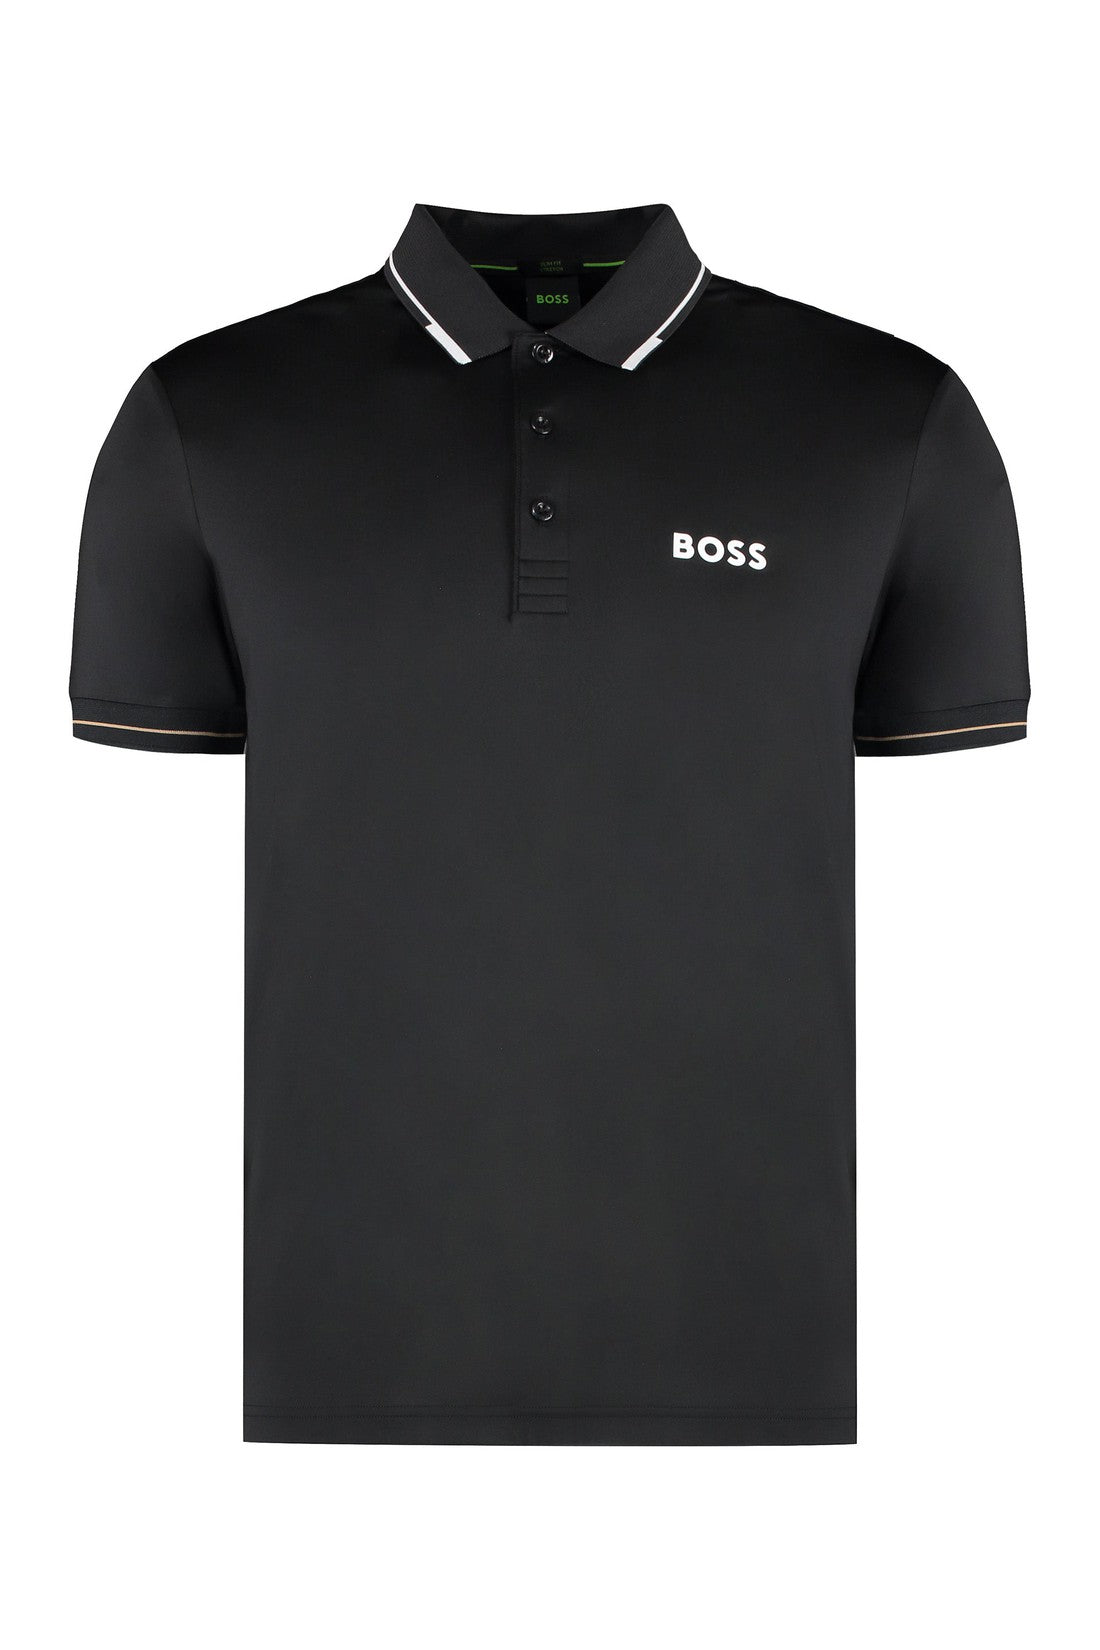 BOSS-OUTLET-SALE-Technical fabric polo shirt-ARCHIVIST